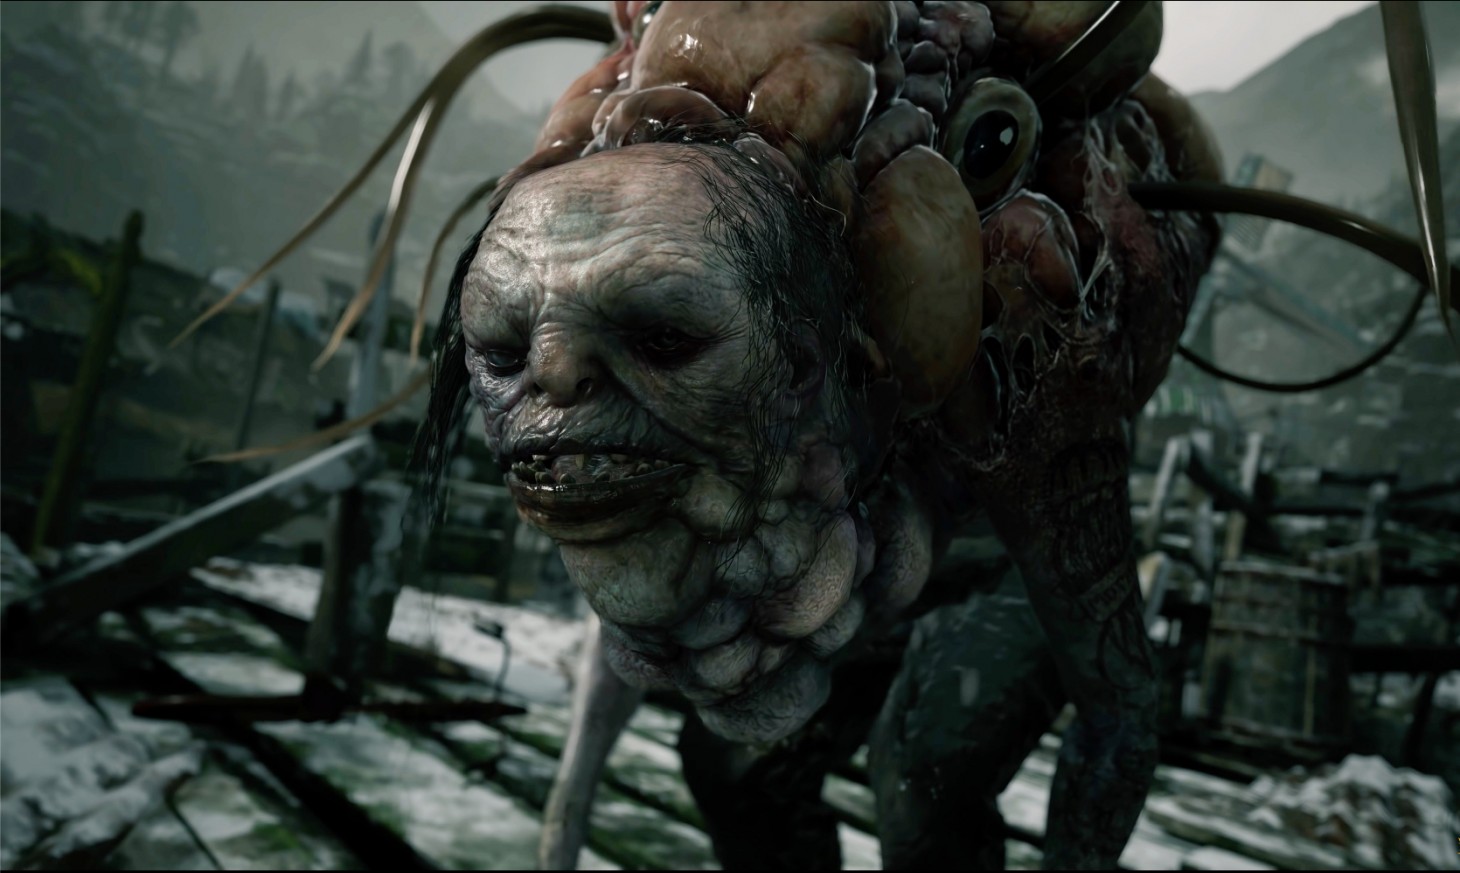 Resident Evil Village' DLC Is On The Way, Says Insider